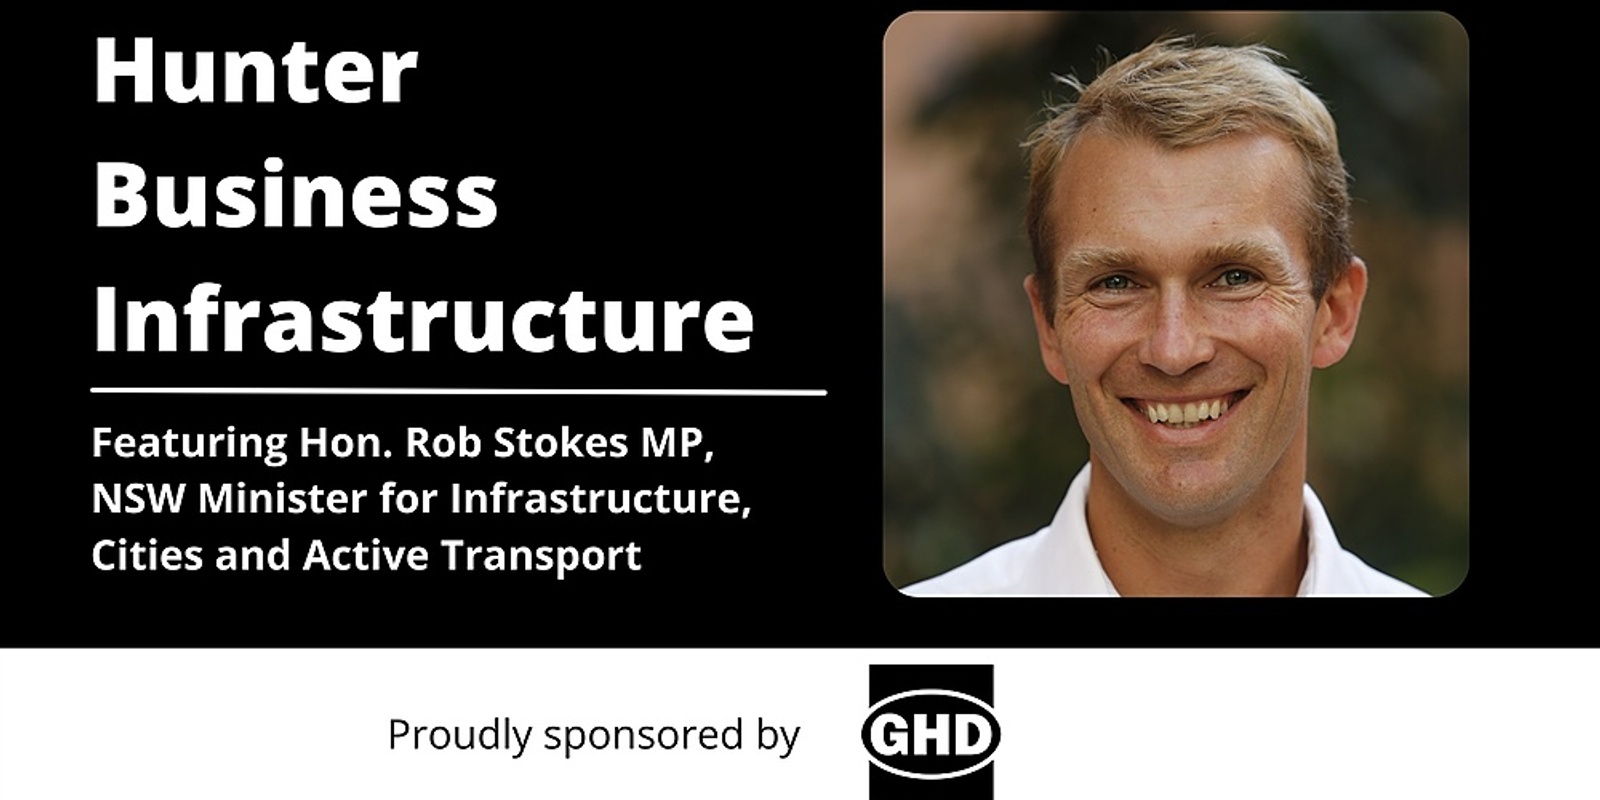 Banner image for Hunter Business Infrastructure featuring Hon. Rob Stokes MP